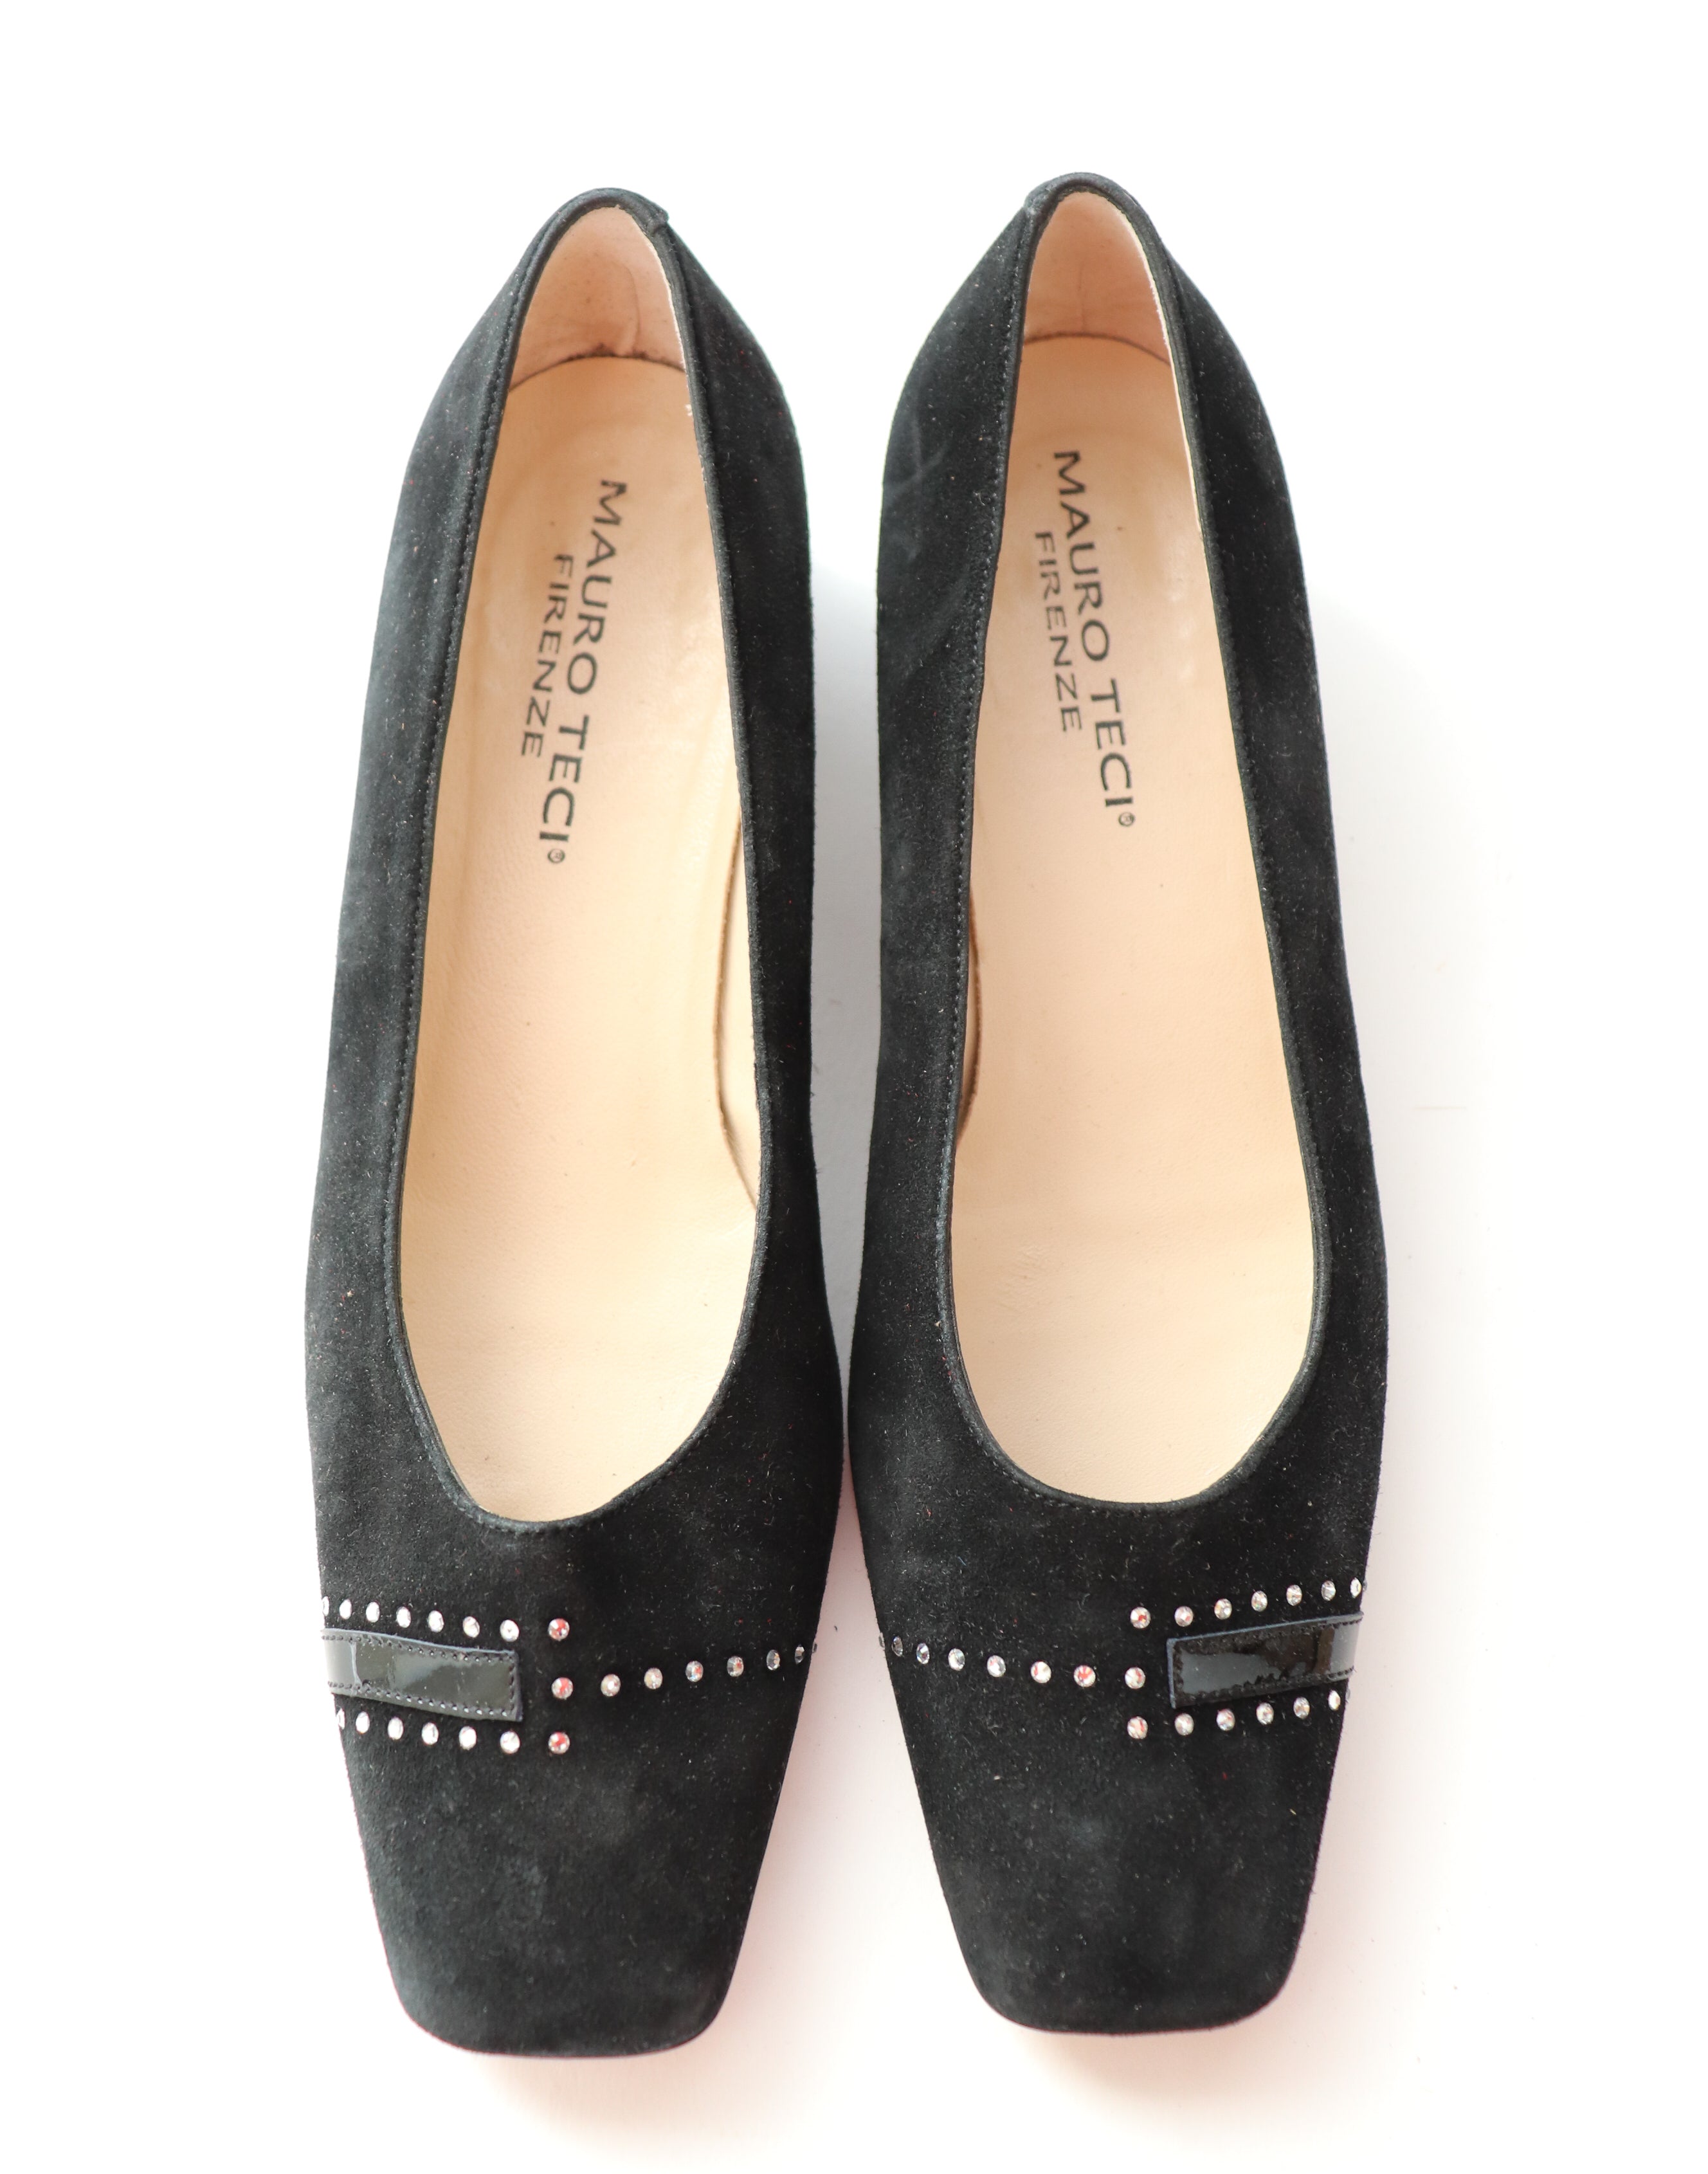 Mauro Teci Black Suede Pumps - 1960s Party Style - Leather 37.5 / UK 4.5